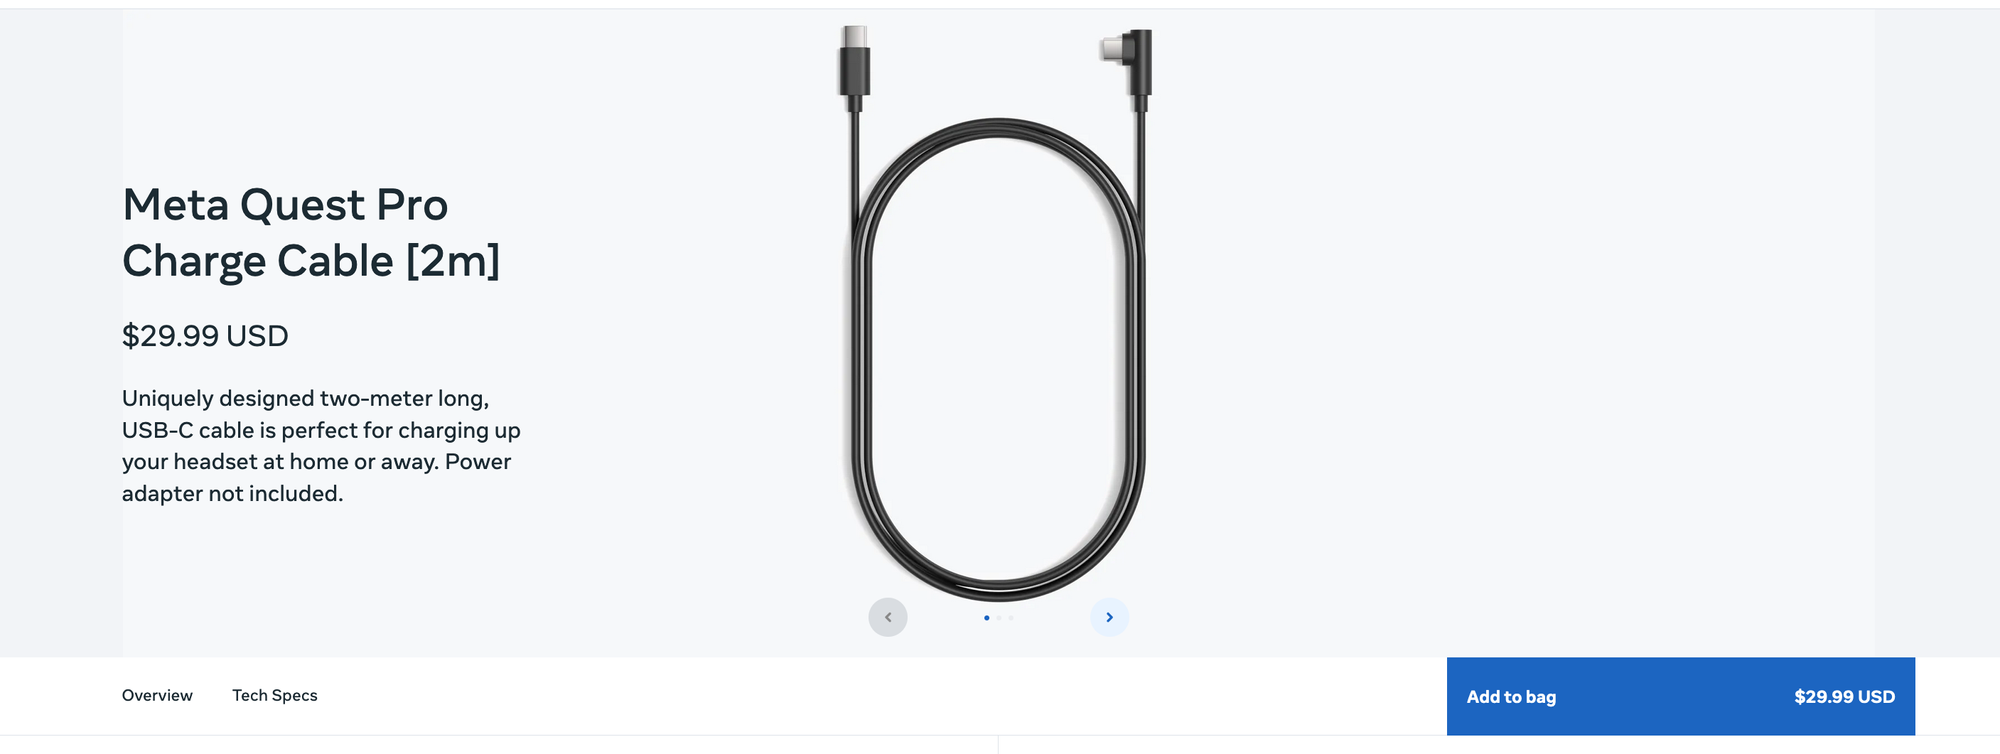 screenshot of meta product page, Meta Quest Pro Charge Cable [2m] $29.99 USD Uniquely designed two-meter long, USB-C cable is perfect for charging up your headset at home or away. Power adapter not included. 